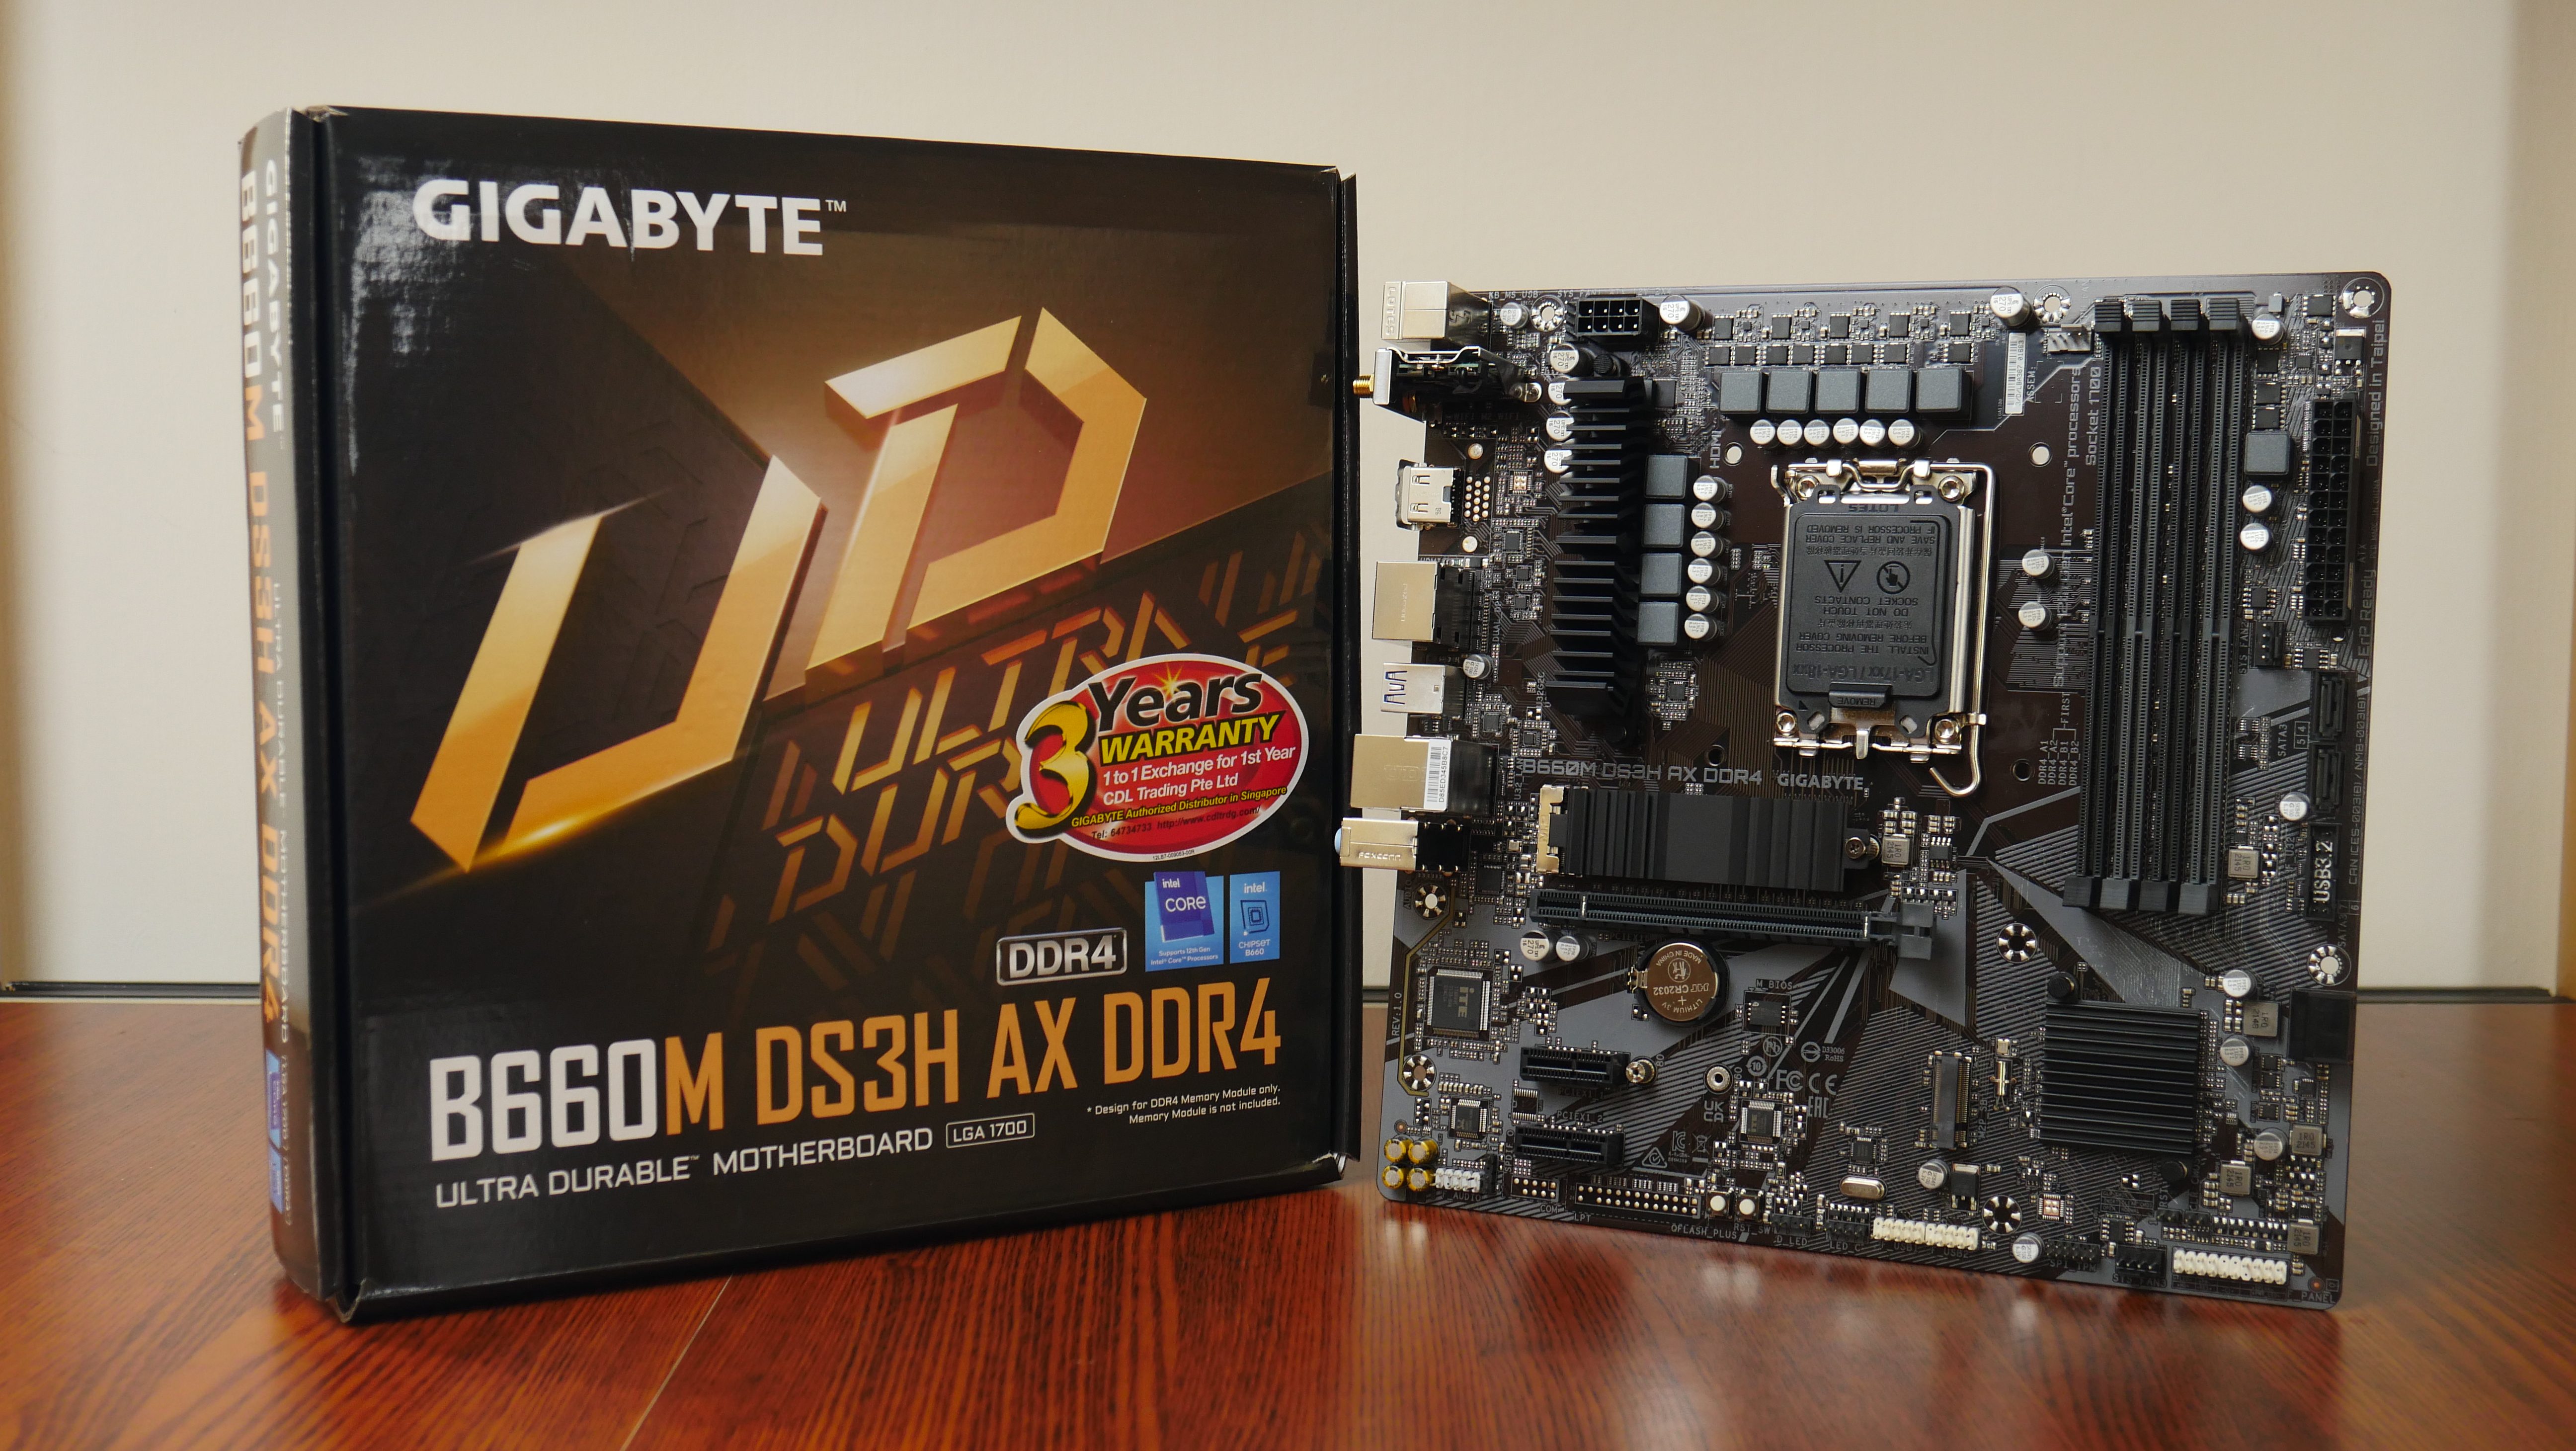 Gigabyte B660M DS3H AX DDR4 Motherboard - Unboxing & Overview